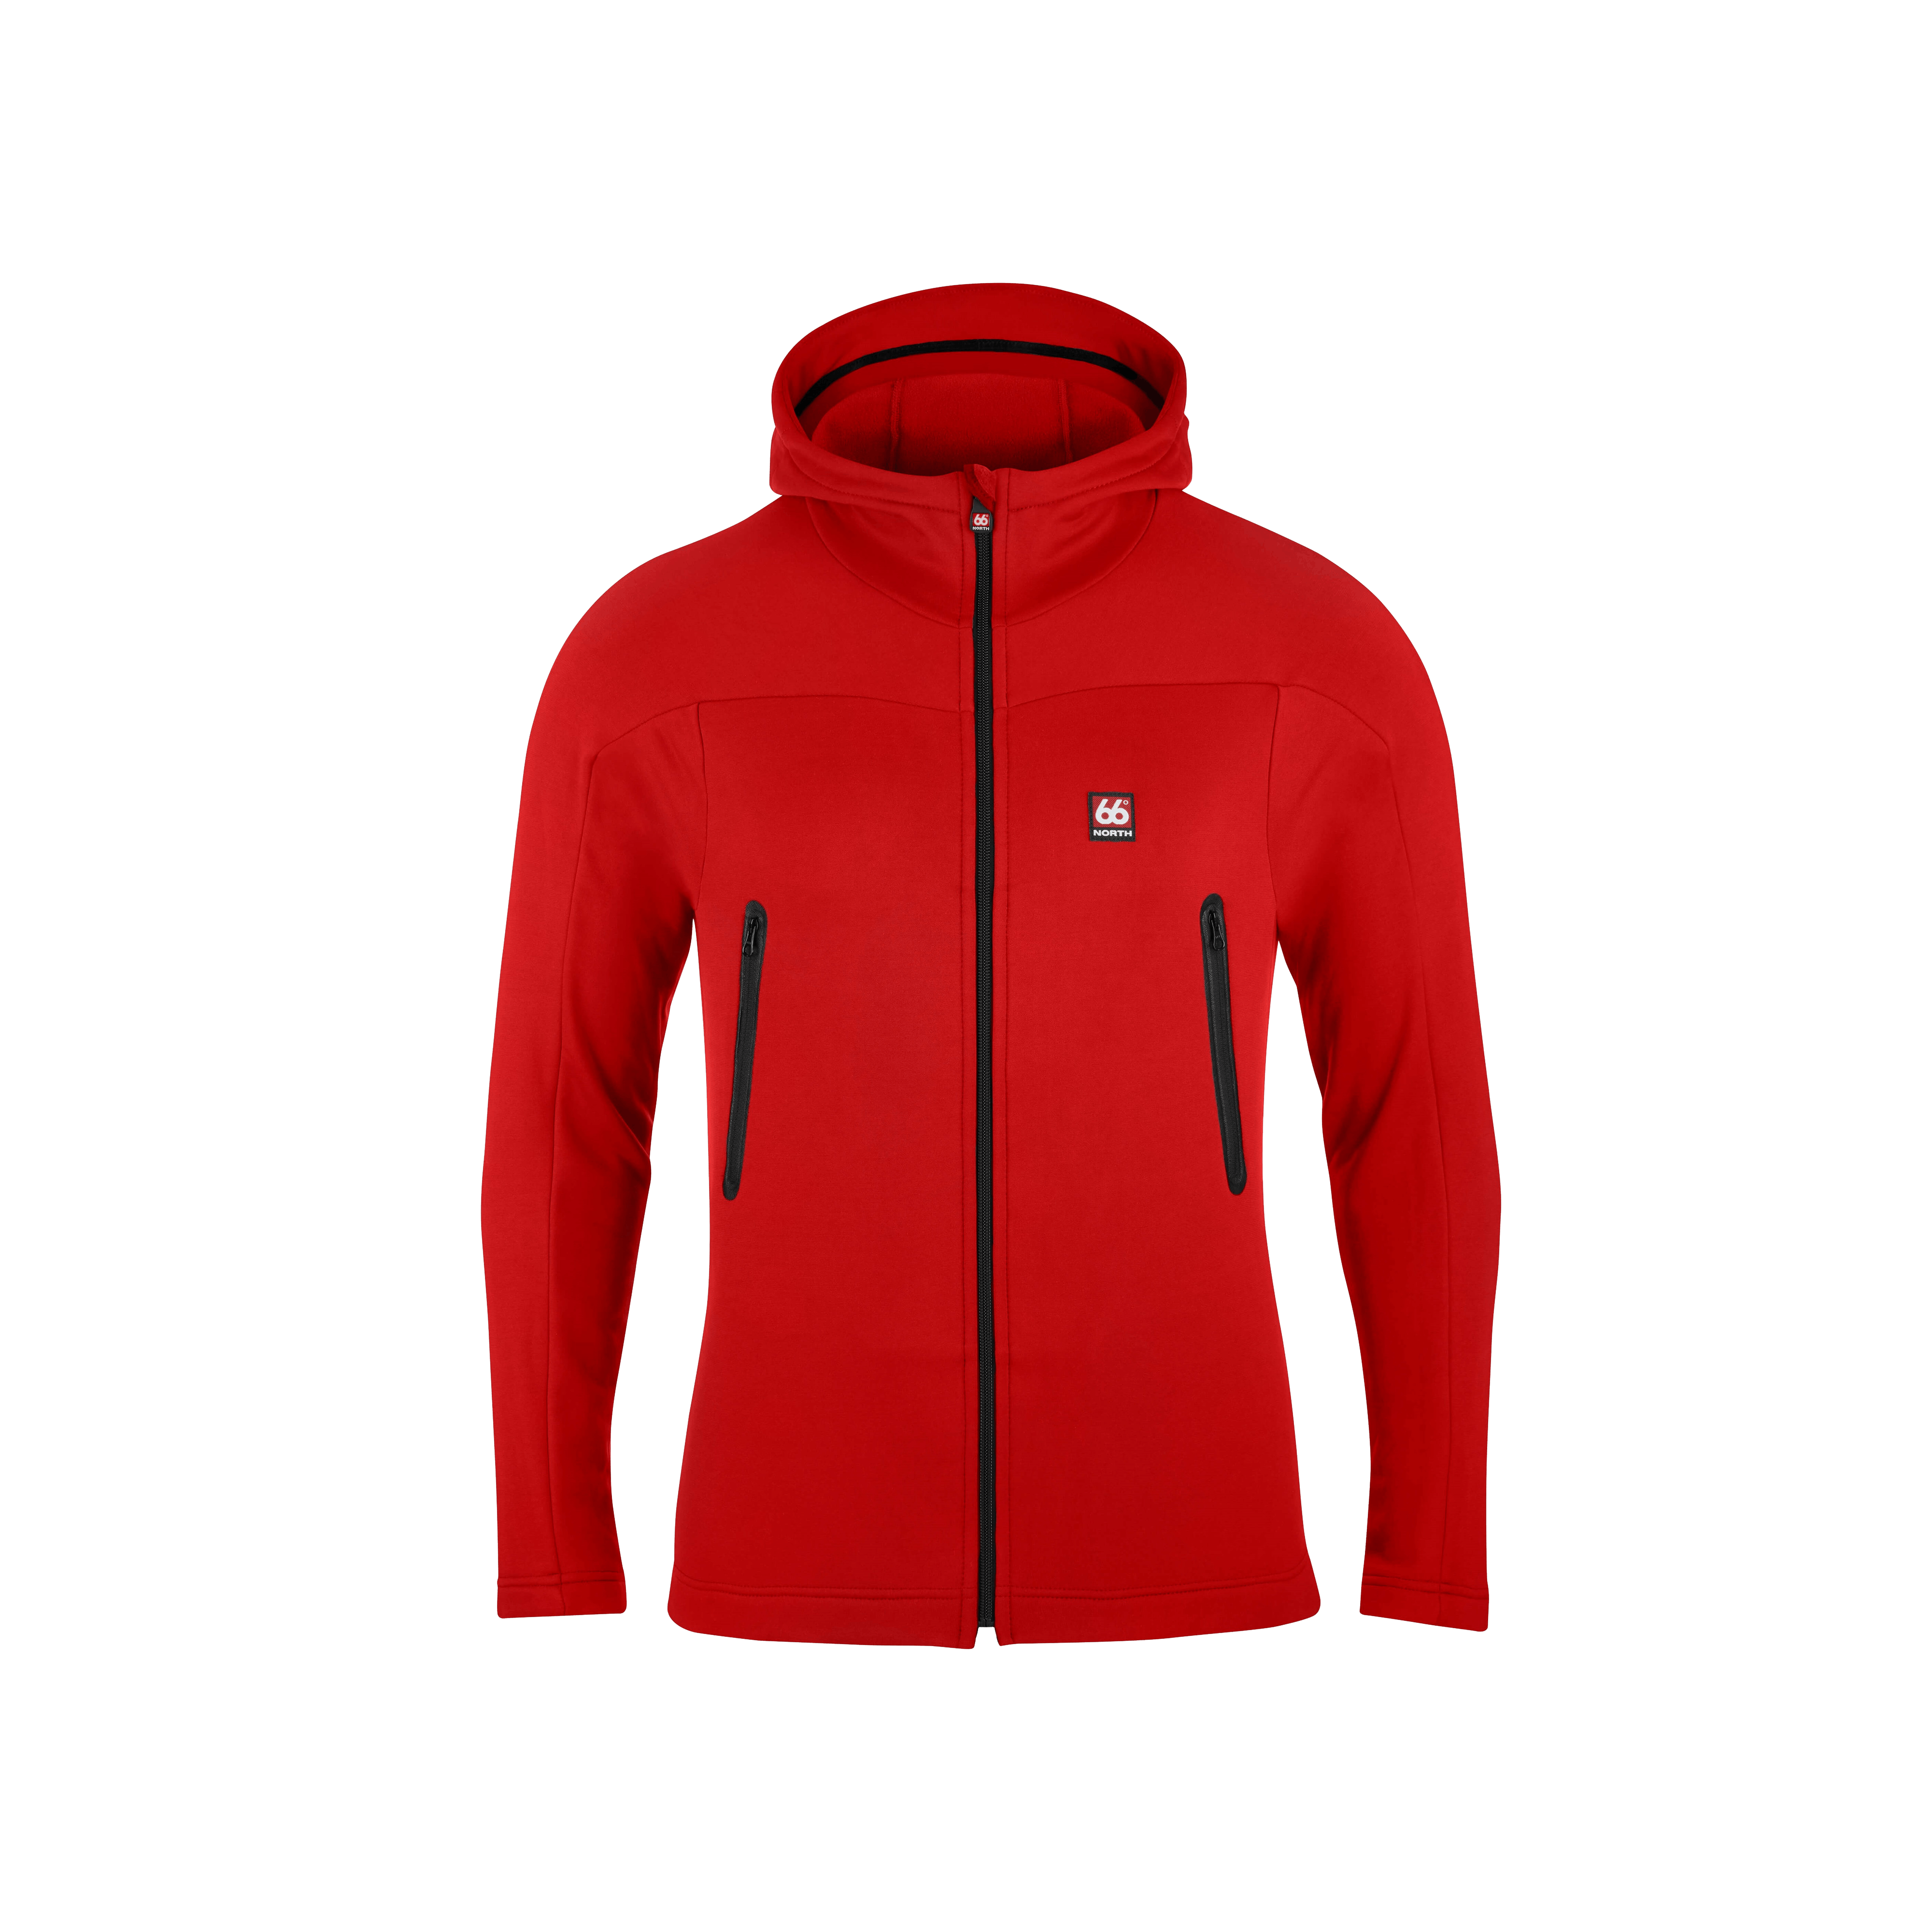 66 North Mens Snfell TopsandVests - Red - S